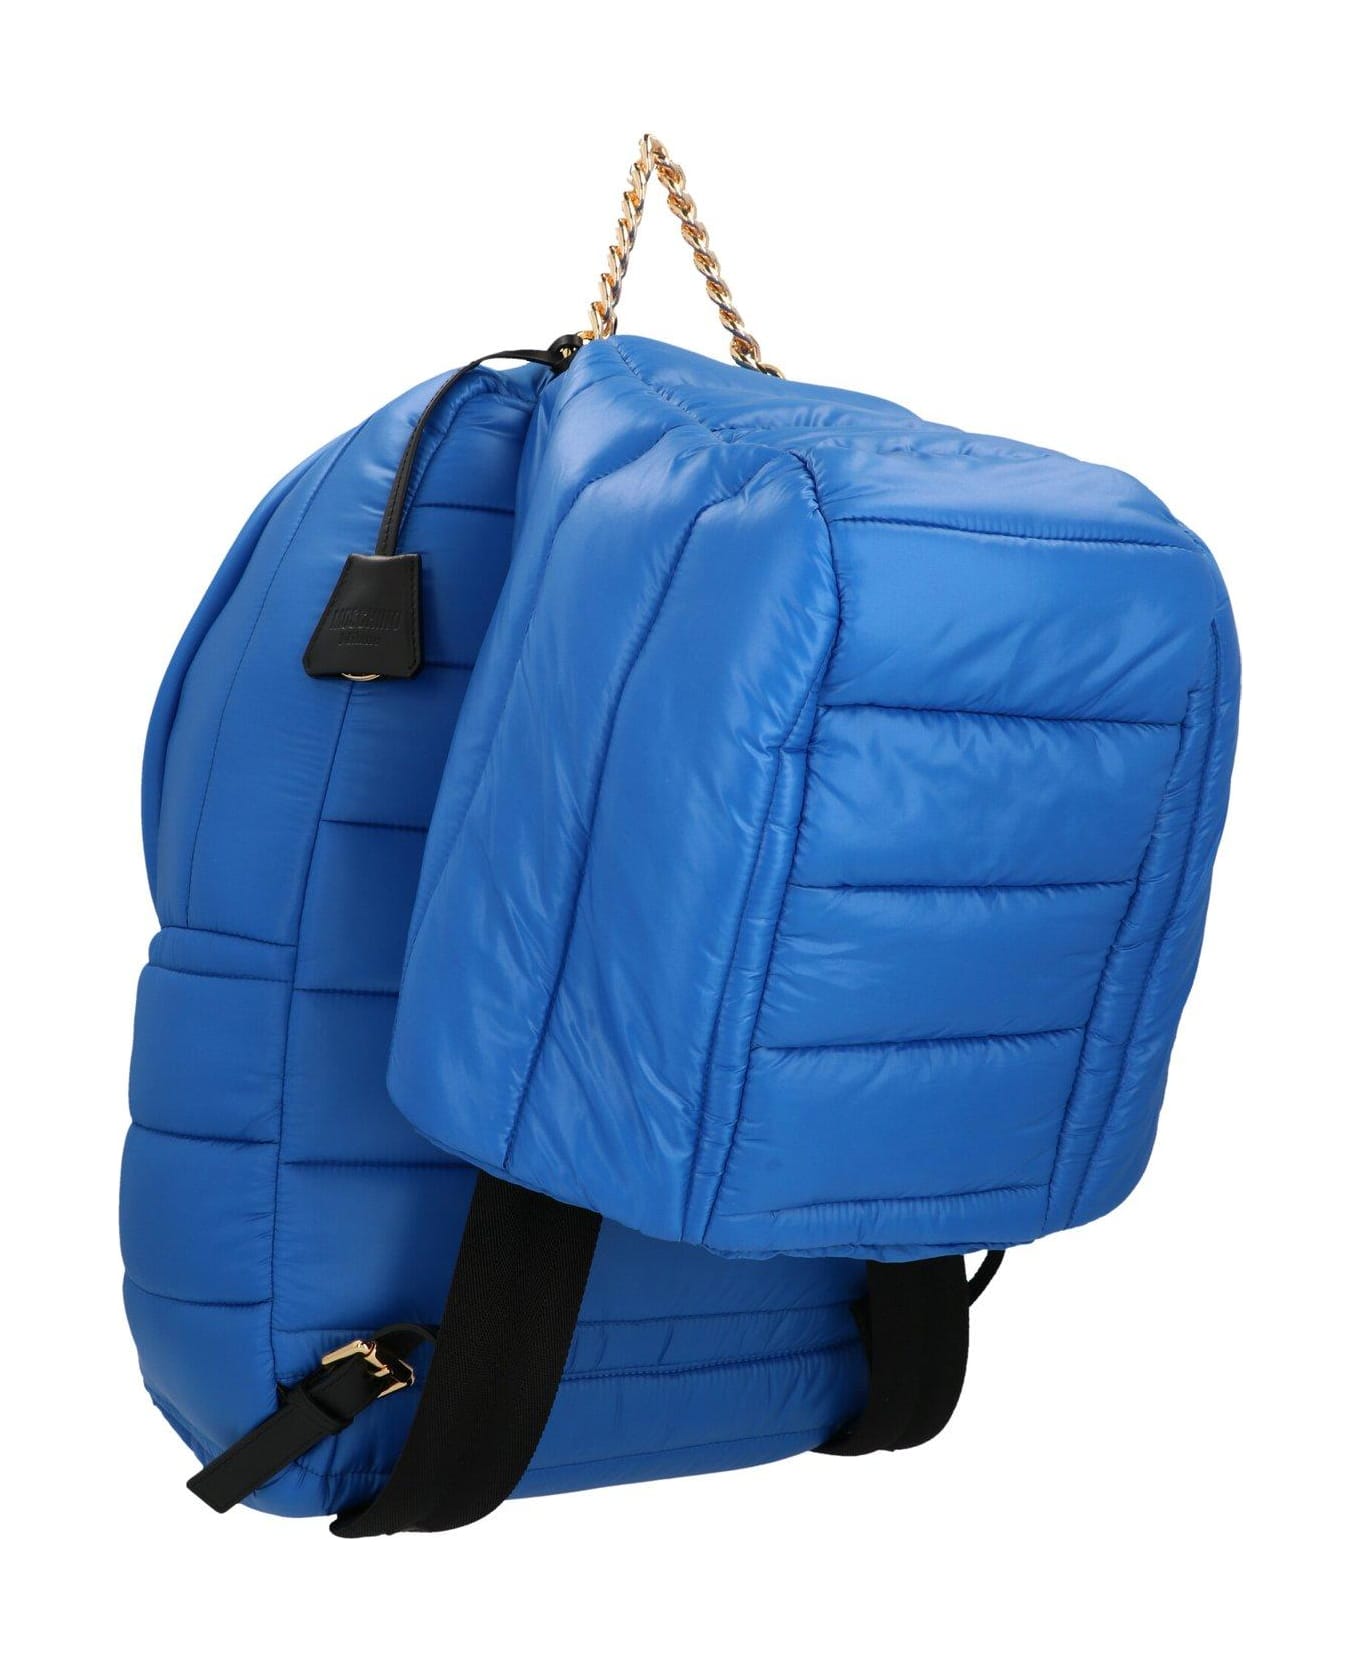 Moschino Quilted Small Backpack - Blue